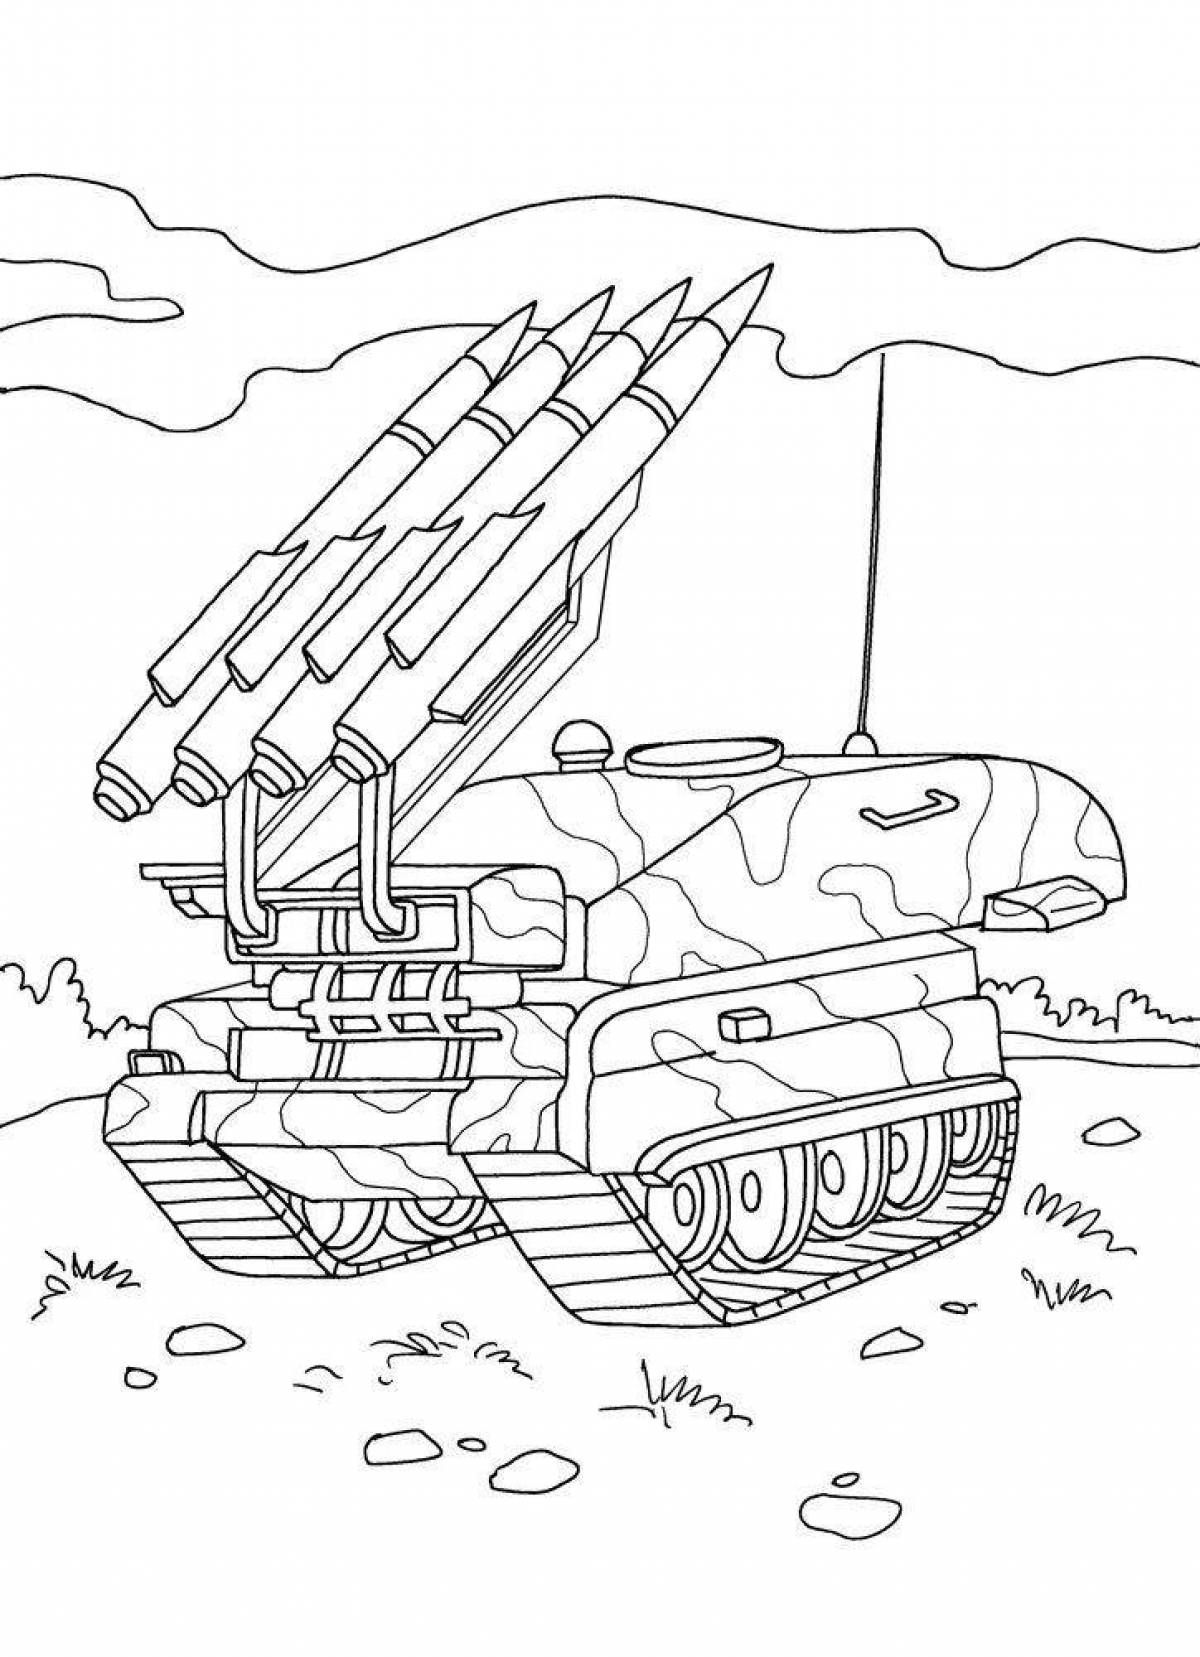 Coloring page funny Russian military equipment